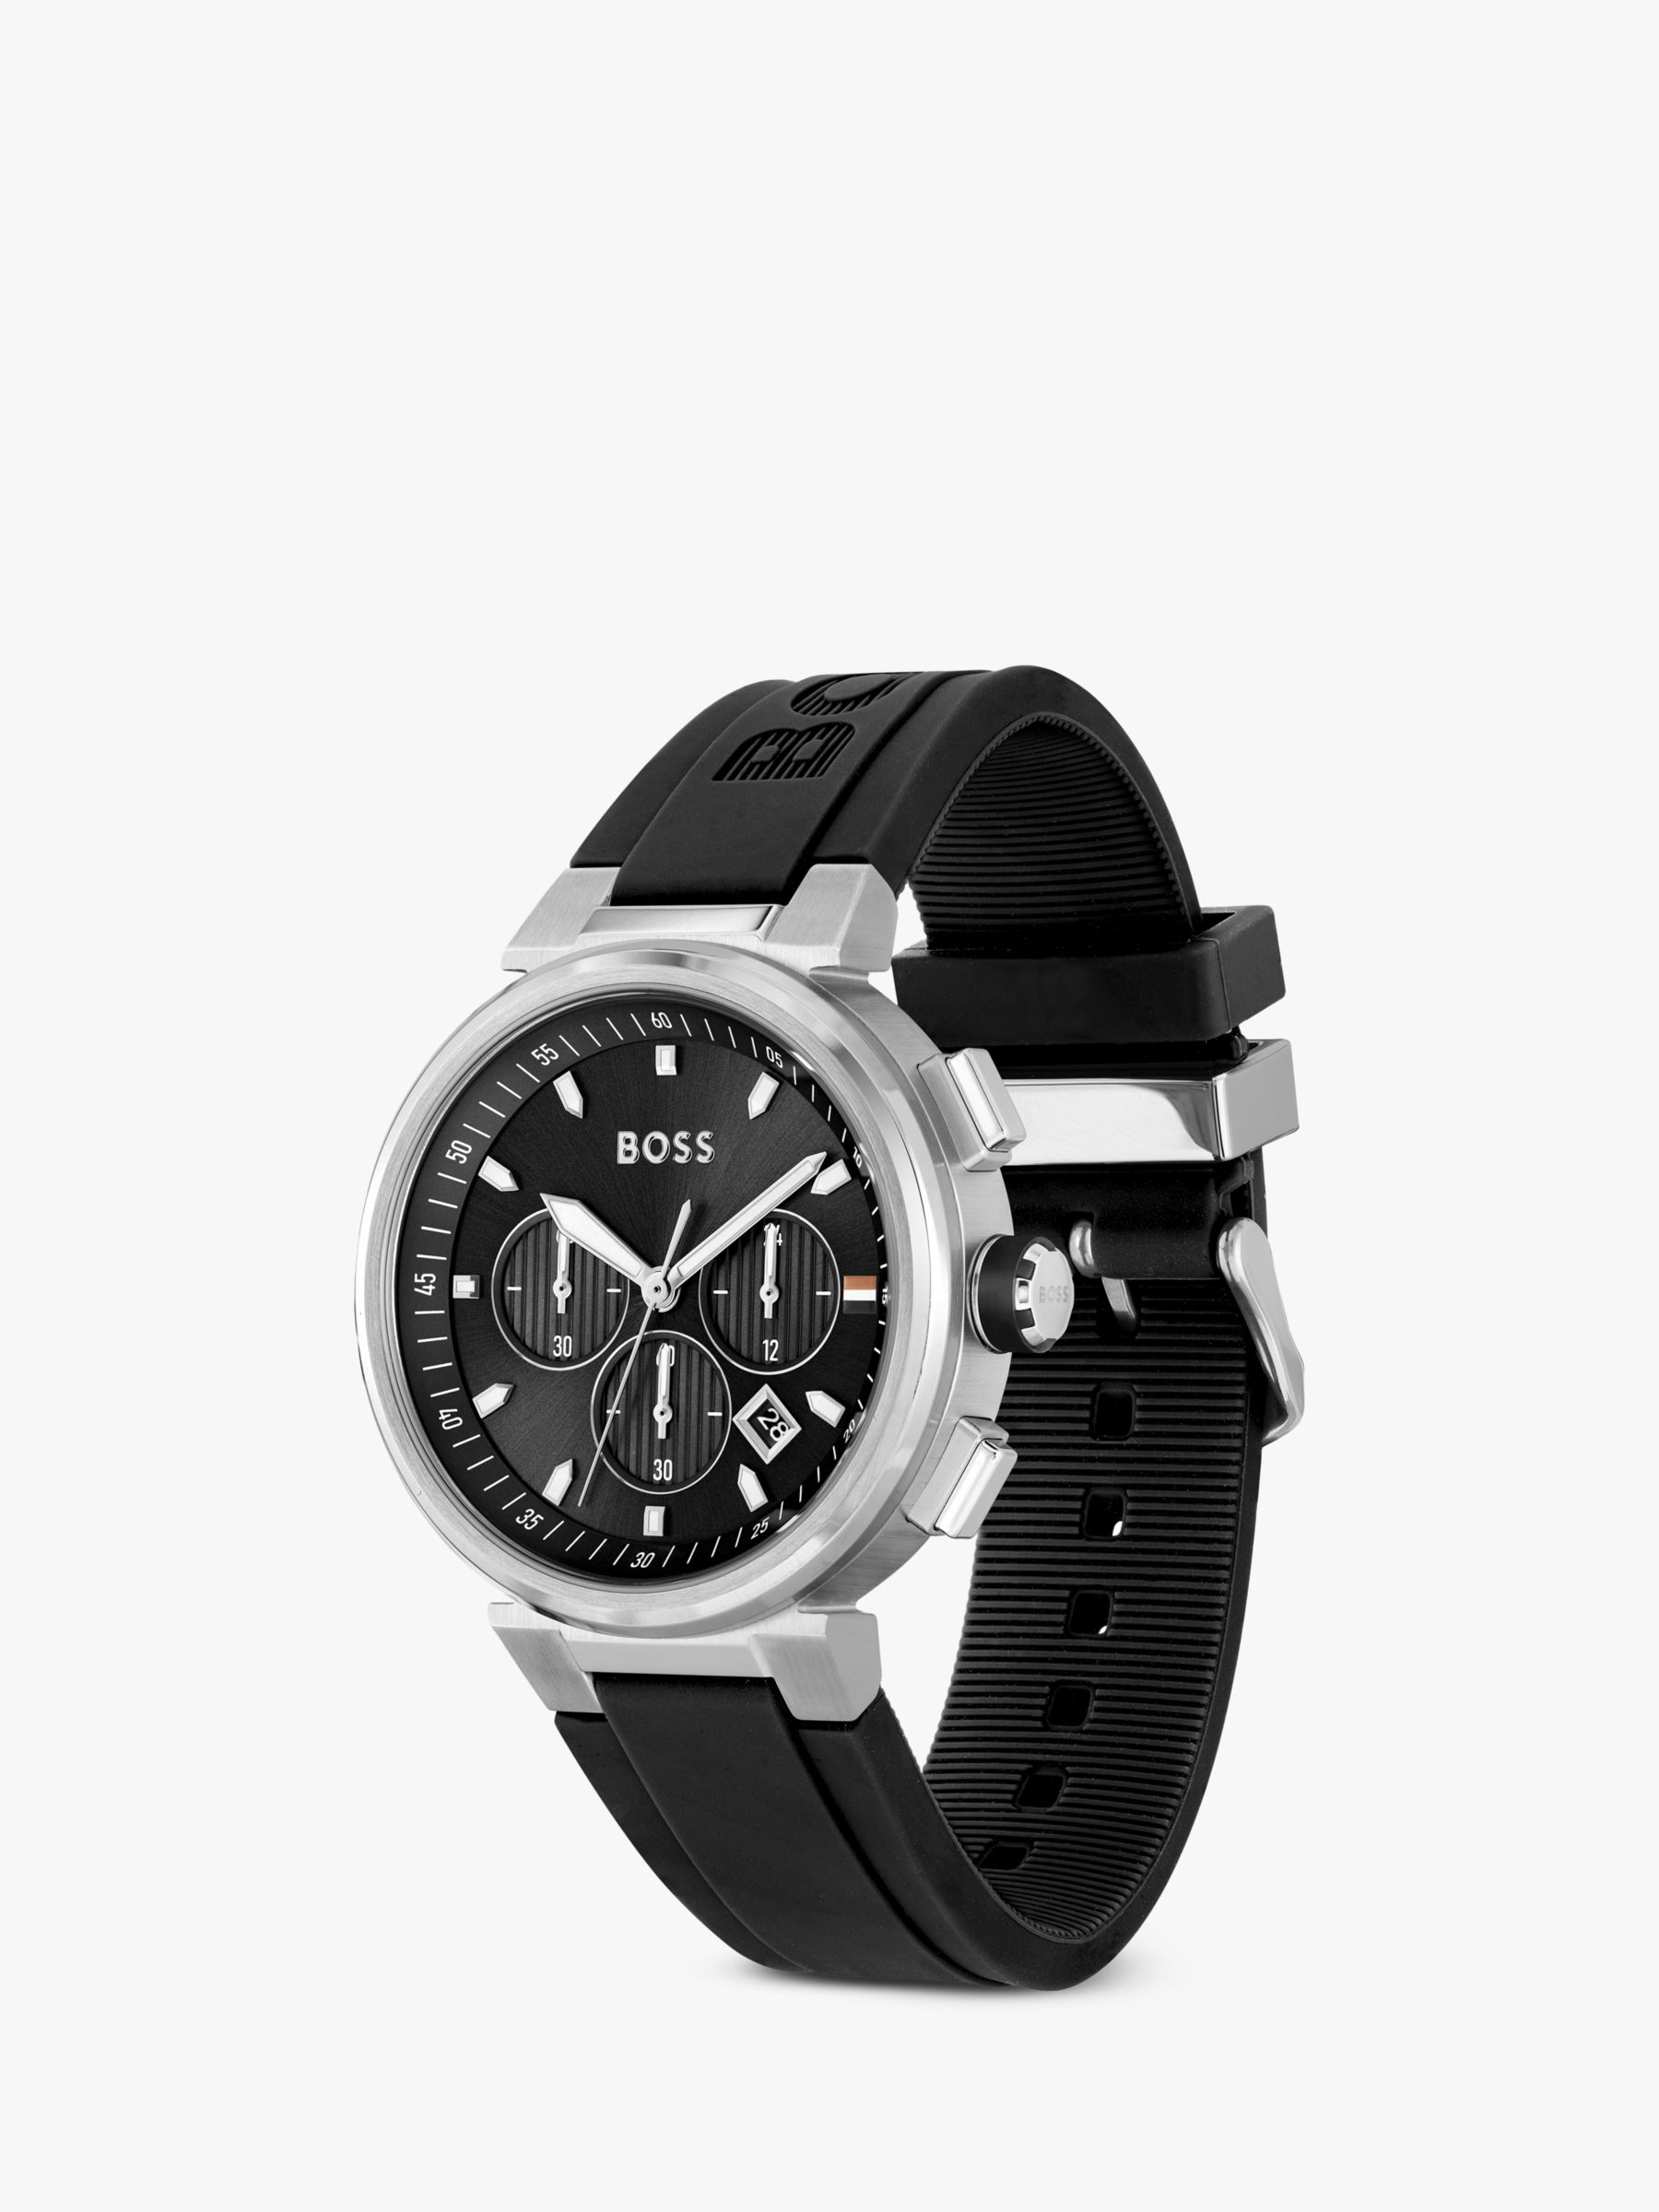 BOSS 1513997 Men's One Chronograph Date Silicone Strap Watch, Black at John & Partners